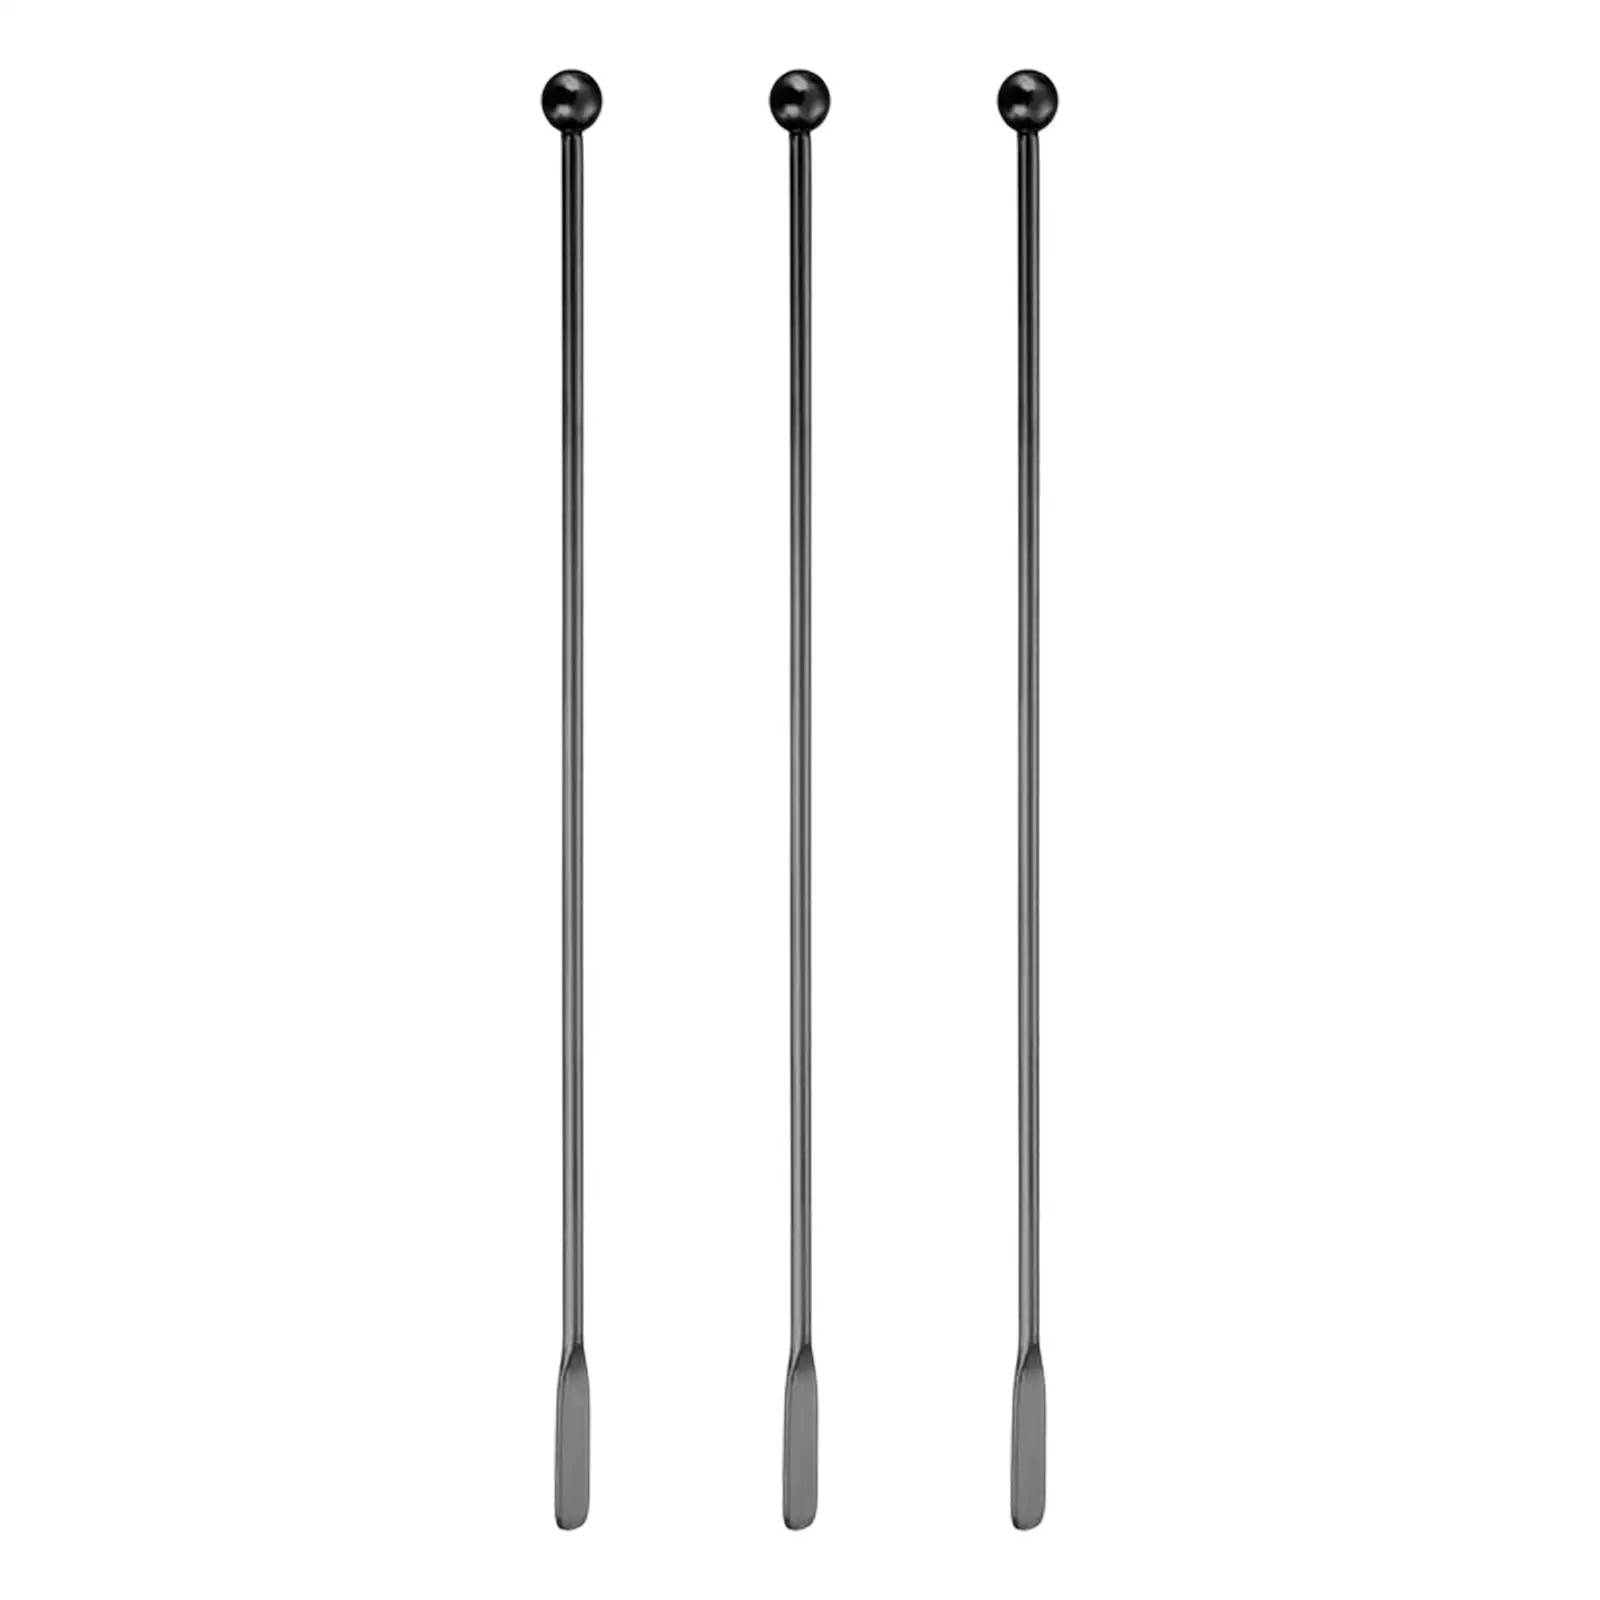 3x Stainless Steel Cocktail Stirrers Brewing Paddle with Long Handle Stirring Paddle Long Stirrer for Home Bar Cocktail